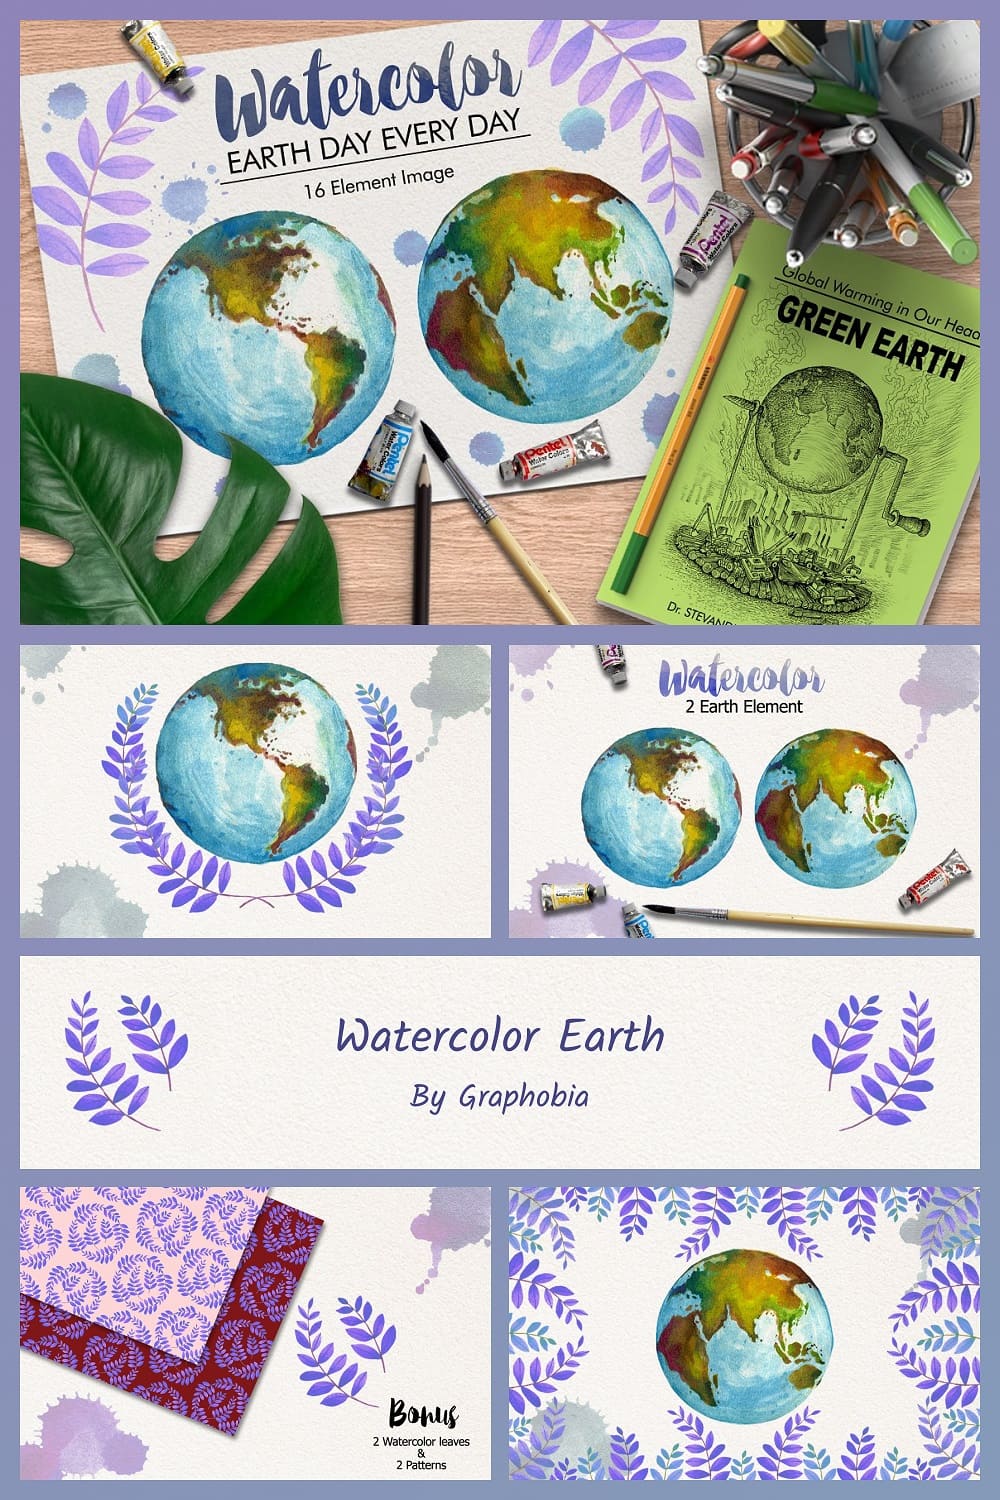 Books, white sheets of paper are decorated with the image of the planet Earth.